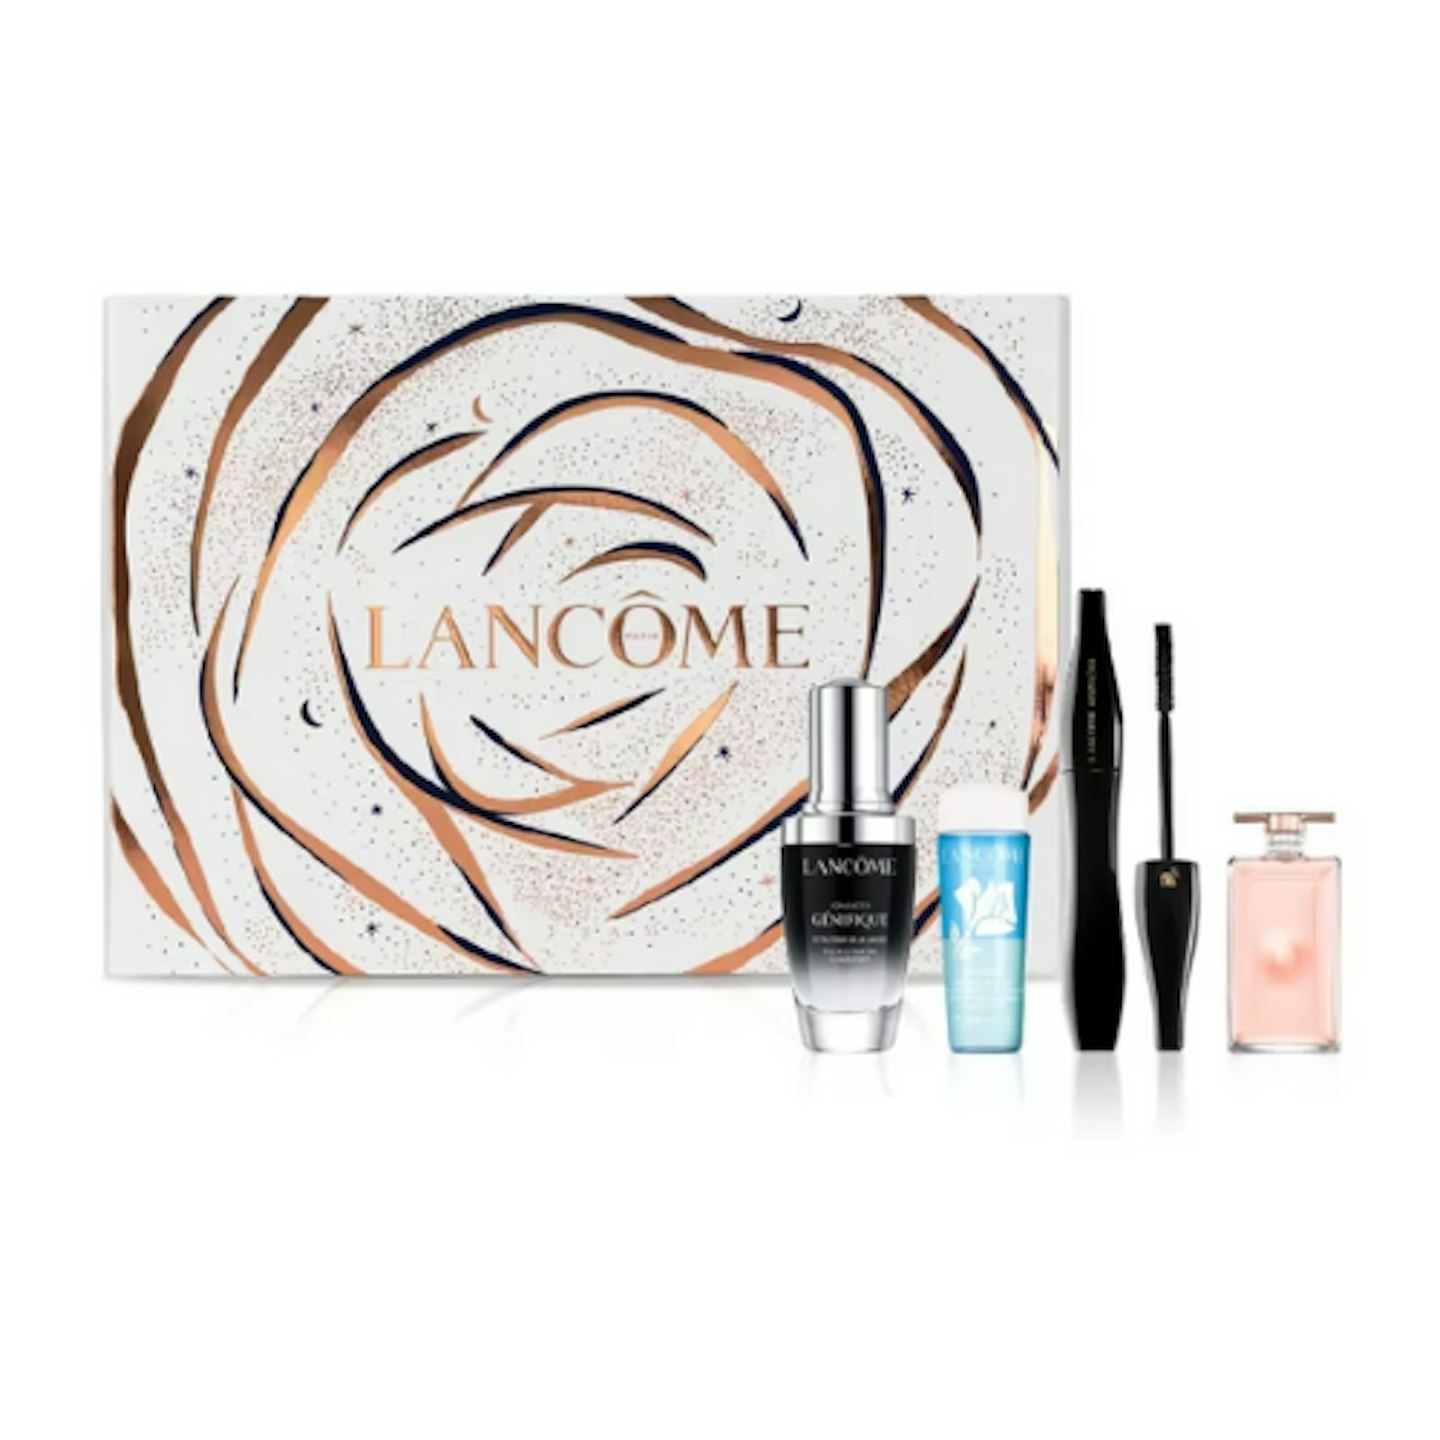 STAR GIFT The Lancome Icons - Exclusive to Boots - Limited Edition